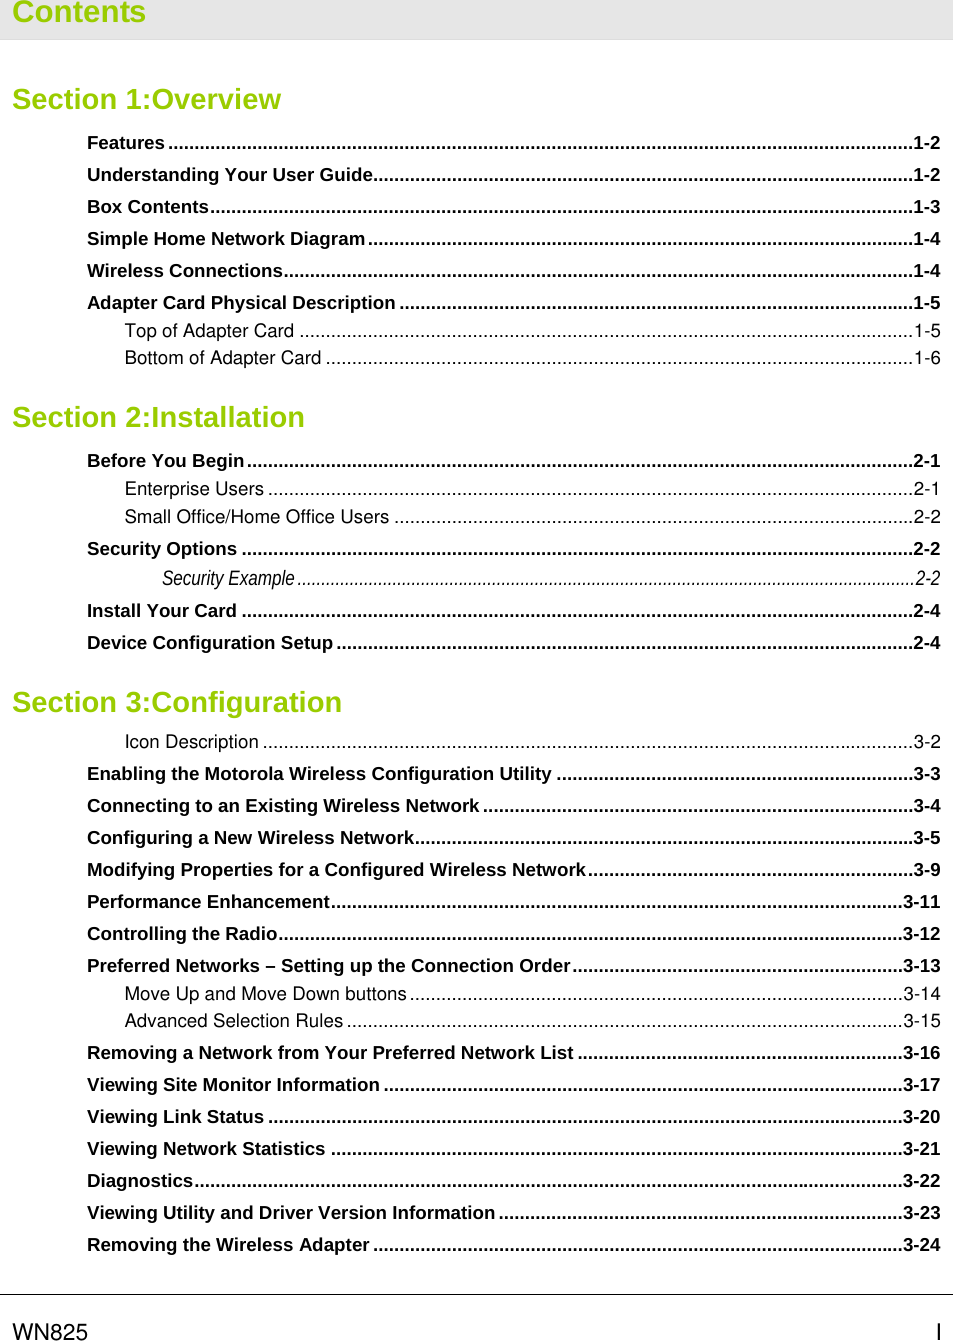   WN825   I Contents Section 1:Overview Features..............................................................................................................................................1-2 Understanding Your User Guide.......................................................................................................1-2 Box Contents......................................................................................................................................1-3 Simple Home Network Diagram........................................................................................................1-4 Wireless Connections........................................................................................................................1-4 Adapter Card Physical Description ..................................................................................................1-5 Top of Adapter Card .....................................................................................................................1-5 Bottom of Adapter Card ................................................................................................................1-6 Section 2:Installation Before You Begin...............................................................................................................................2-1 Enterprise Users ...........................................................................................................................2-1 Small Office/Home Office Users ...................................................................................................2-2 Security Options ................................................................................................................................2-2 Security Example..................................................................................................................................2-2 Install Your Card ................................................................................................................................2-4 Device Configuration Setup..............................................................................................................2-4 Section 3:Configuration Icon Description ............................................................................................................................3-2 Enabling the Motorola Wireless Configuration Utility ....................................................................3-3 Connecting to an Existing Wireless Network ..................................................................................3-4 Configuring a New Wireless Network...............................................................................................3-5 Modifying Properties for a Configured Wireless Network..............................................................3-9 Performance Enhancement.............................................................................................................3-11 Controlling the Radio.......................................................................................................................3-12 Preferred Networks – Setting up the Connection Order...............................................................3-13 Move Up and Move Down buttons..............................................................................................3-14 Advanced Selection Rules ..........................................................................................................3-15 Removing a Network from Your Preferred Network List ..............................................................3-16 Viewing Site Monitor Information ...................................................................................................3-17 Viewing Link Status .........................................................................................................................3-20 Viewing Network Statistics .............................................................................................................3-21 Diagnostics.......................................................................................................................................3-22 Viewing Utility and Driver Version Information .............................................................................3-23 Removing the Wireless Adapter.....................................................................................................3-24  